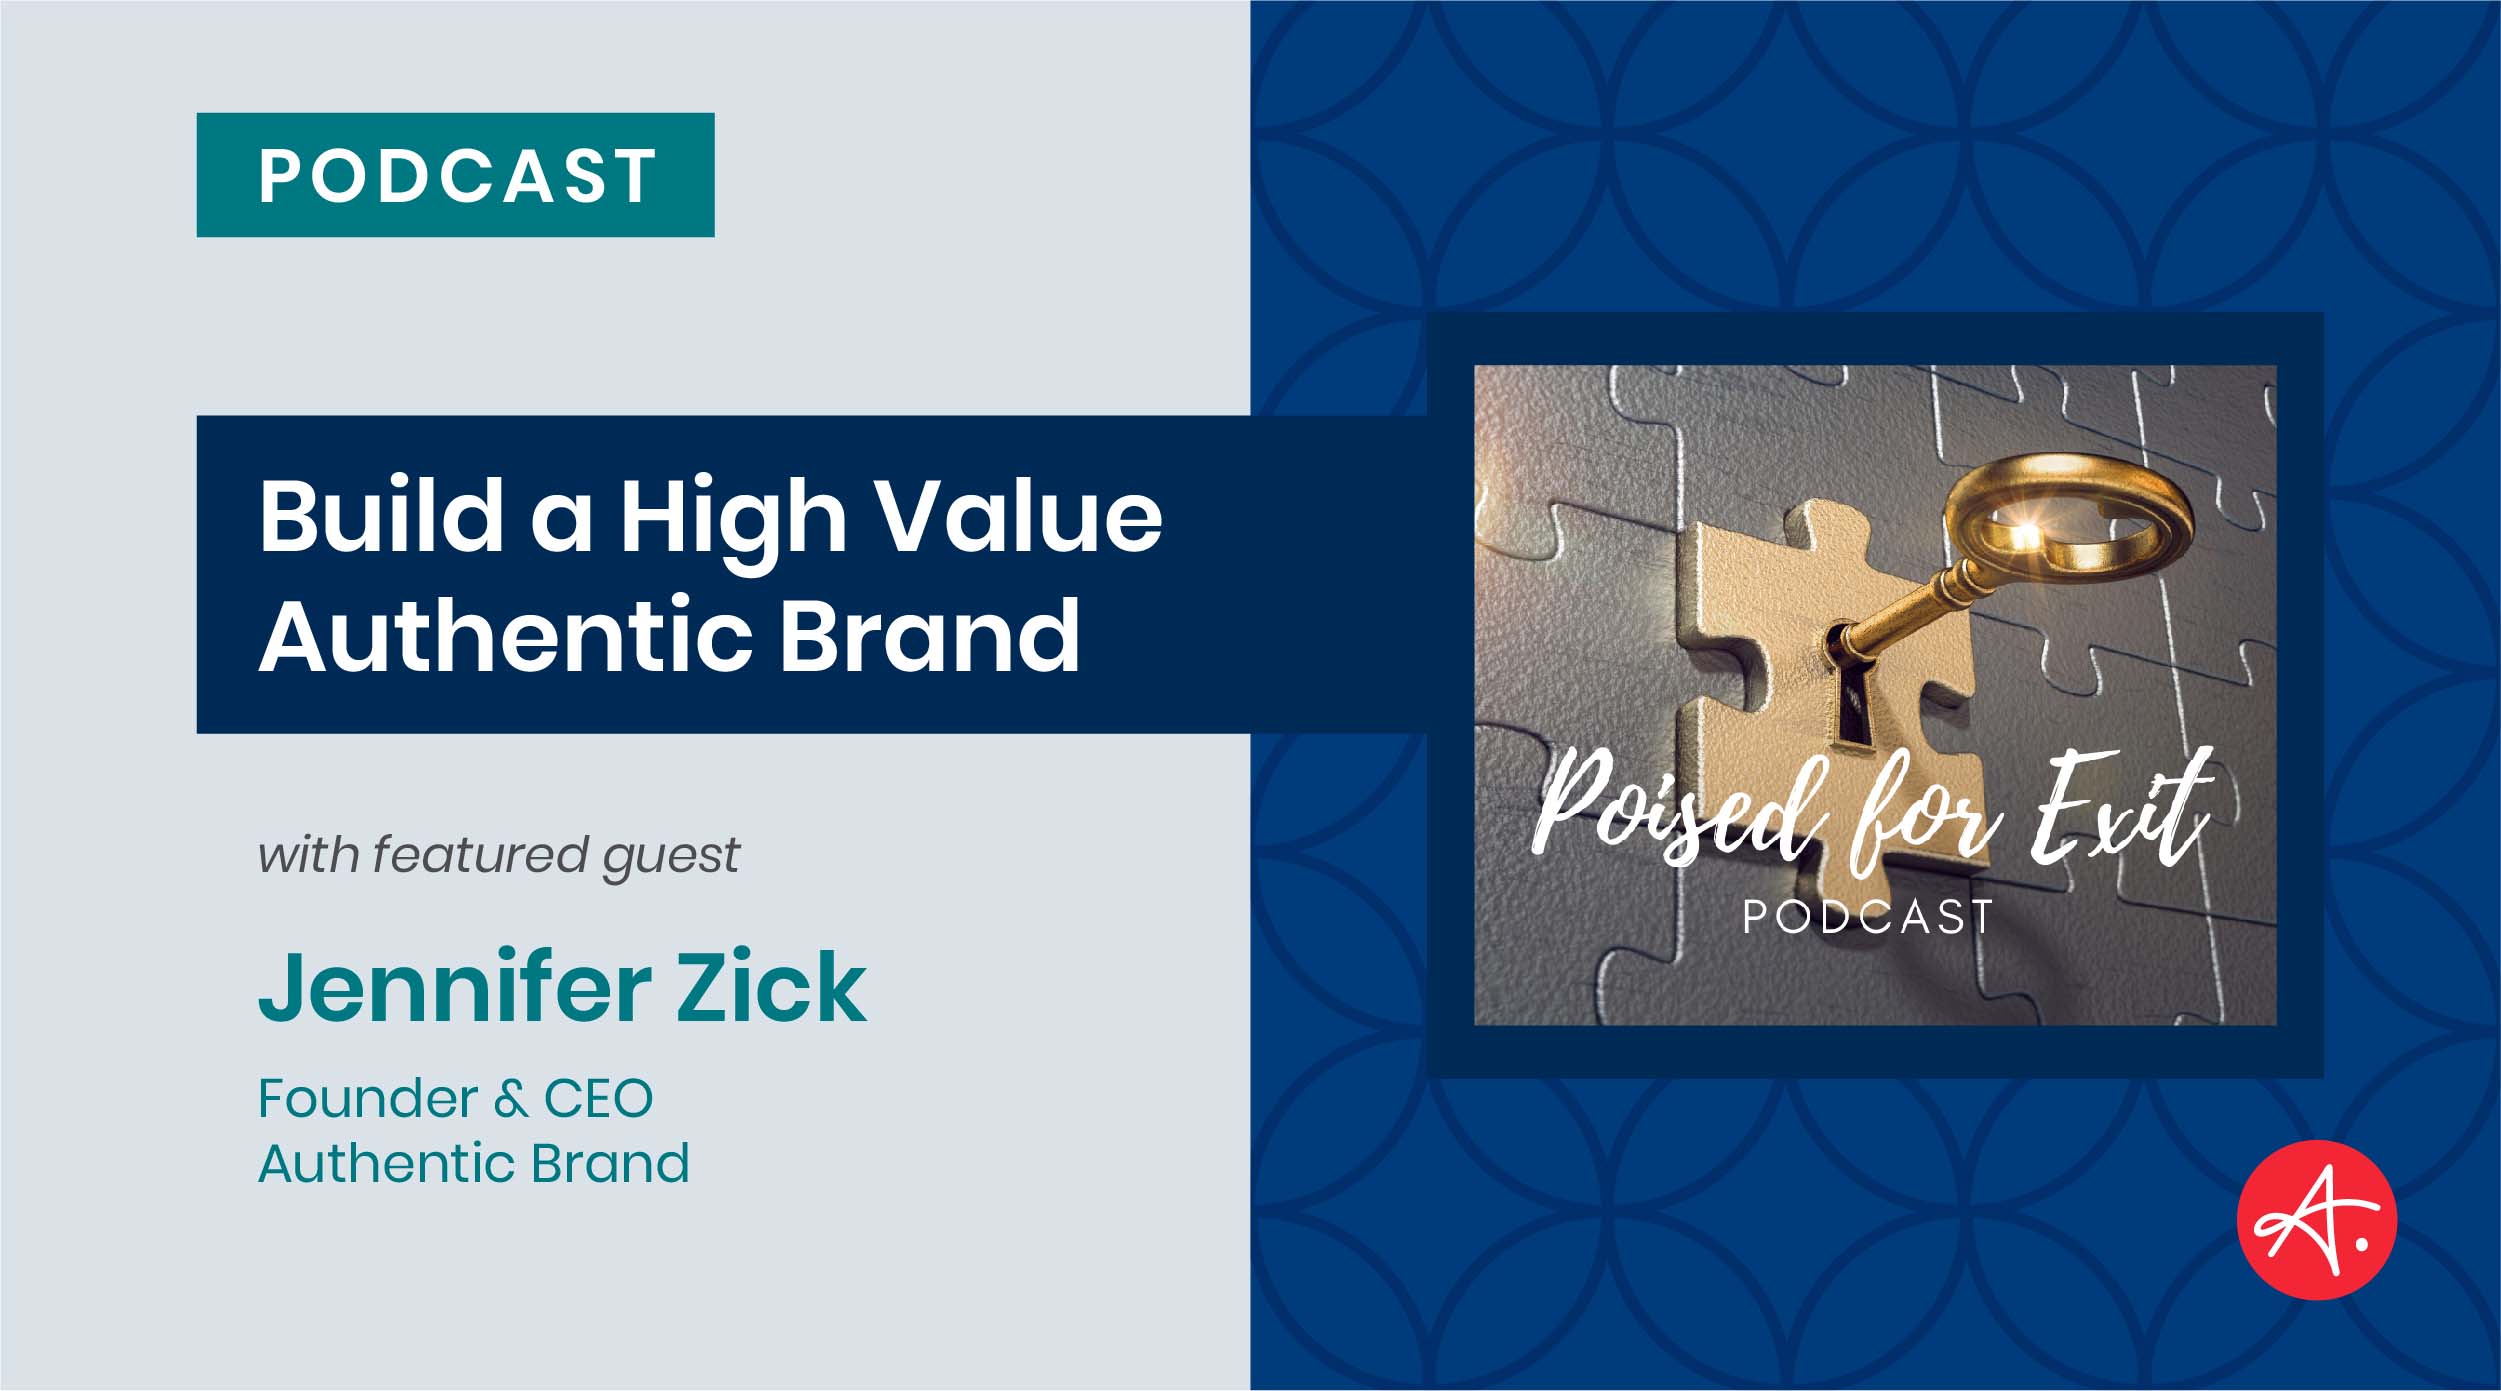 Poised for Exit Podcast Featuring Jennifer Zick